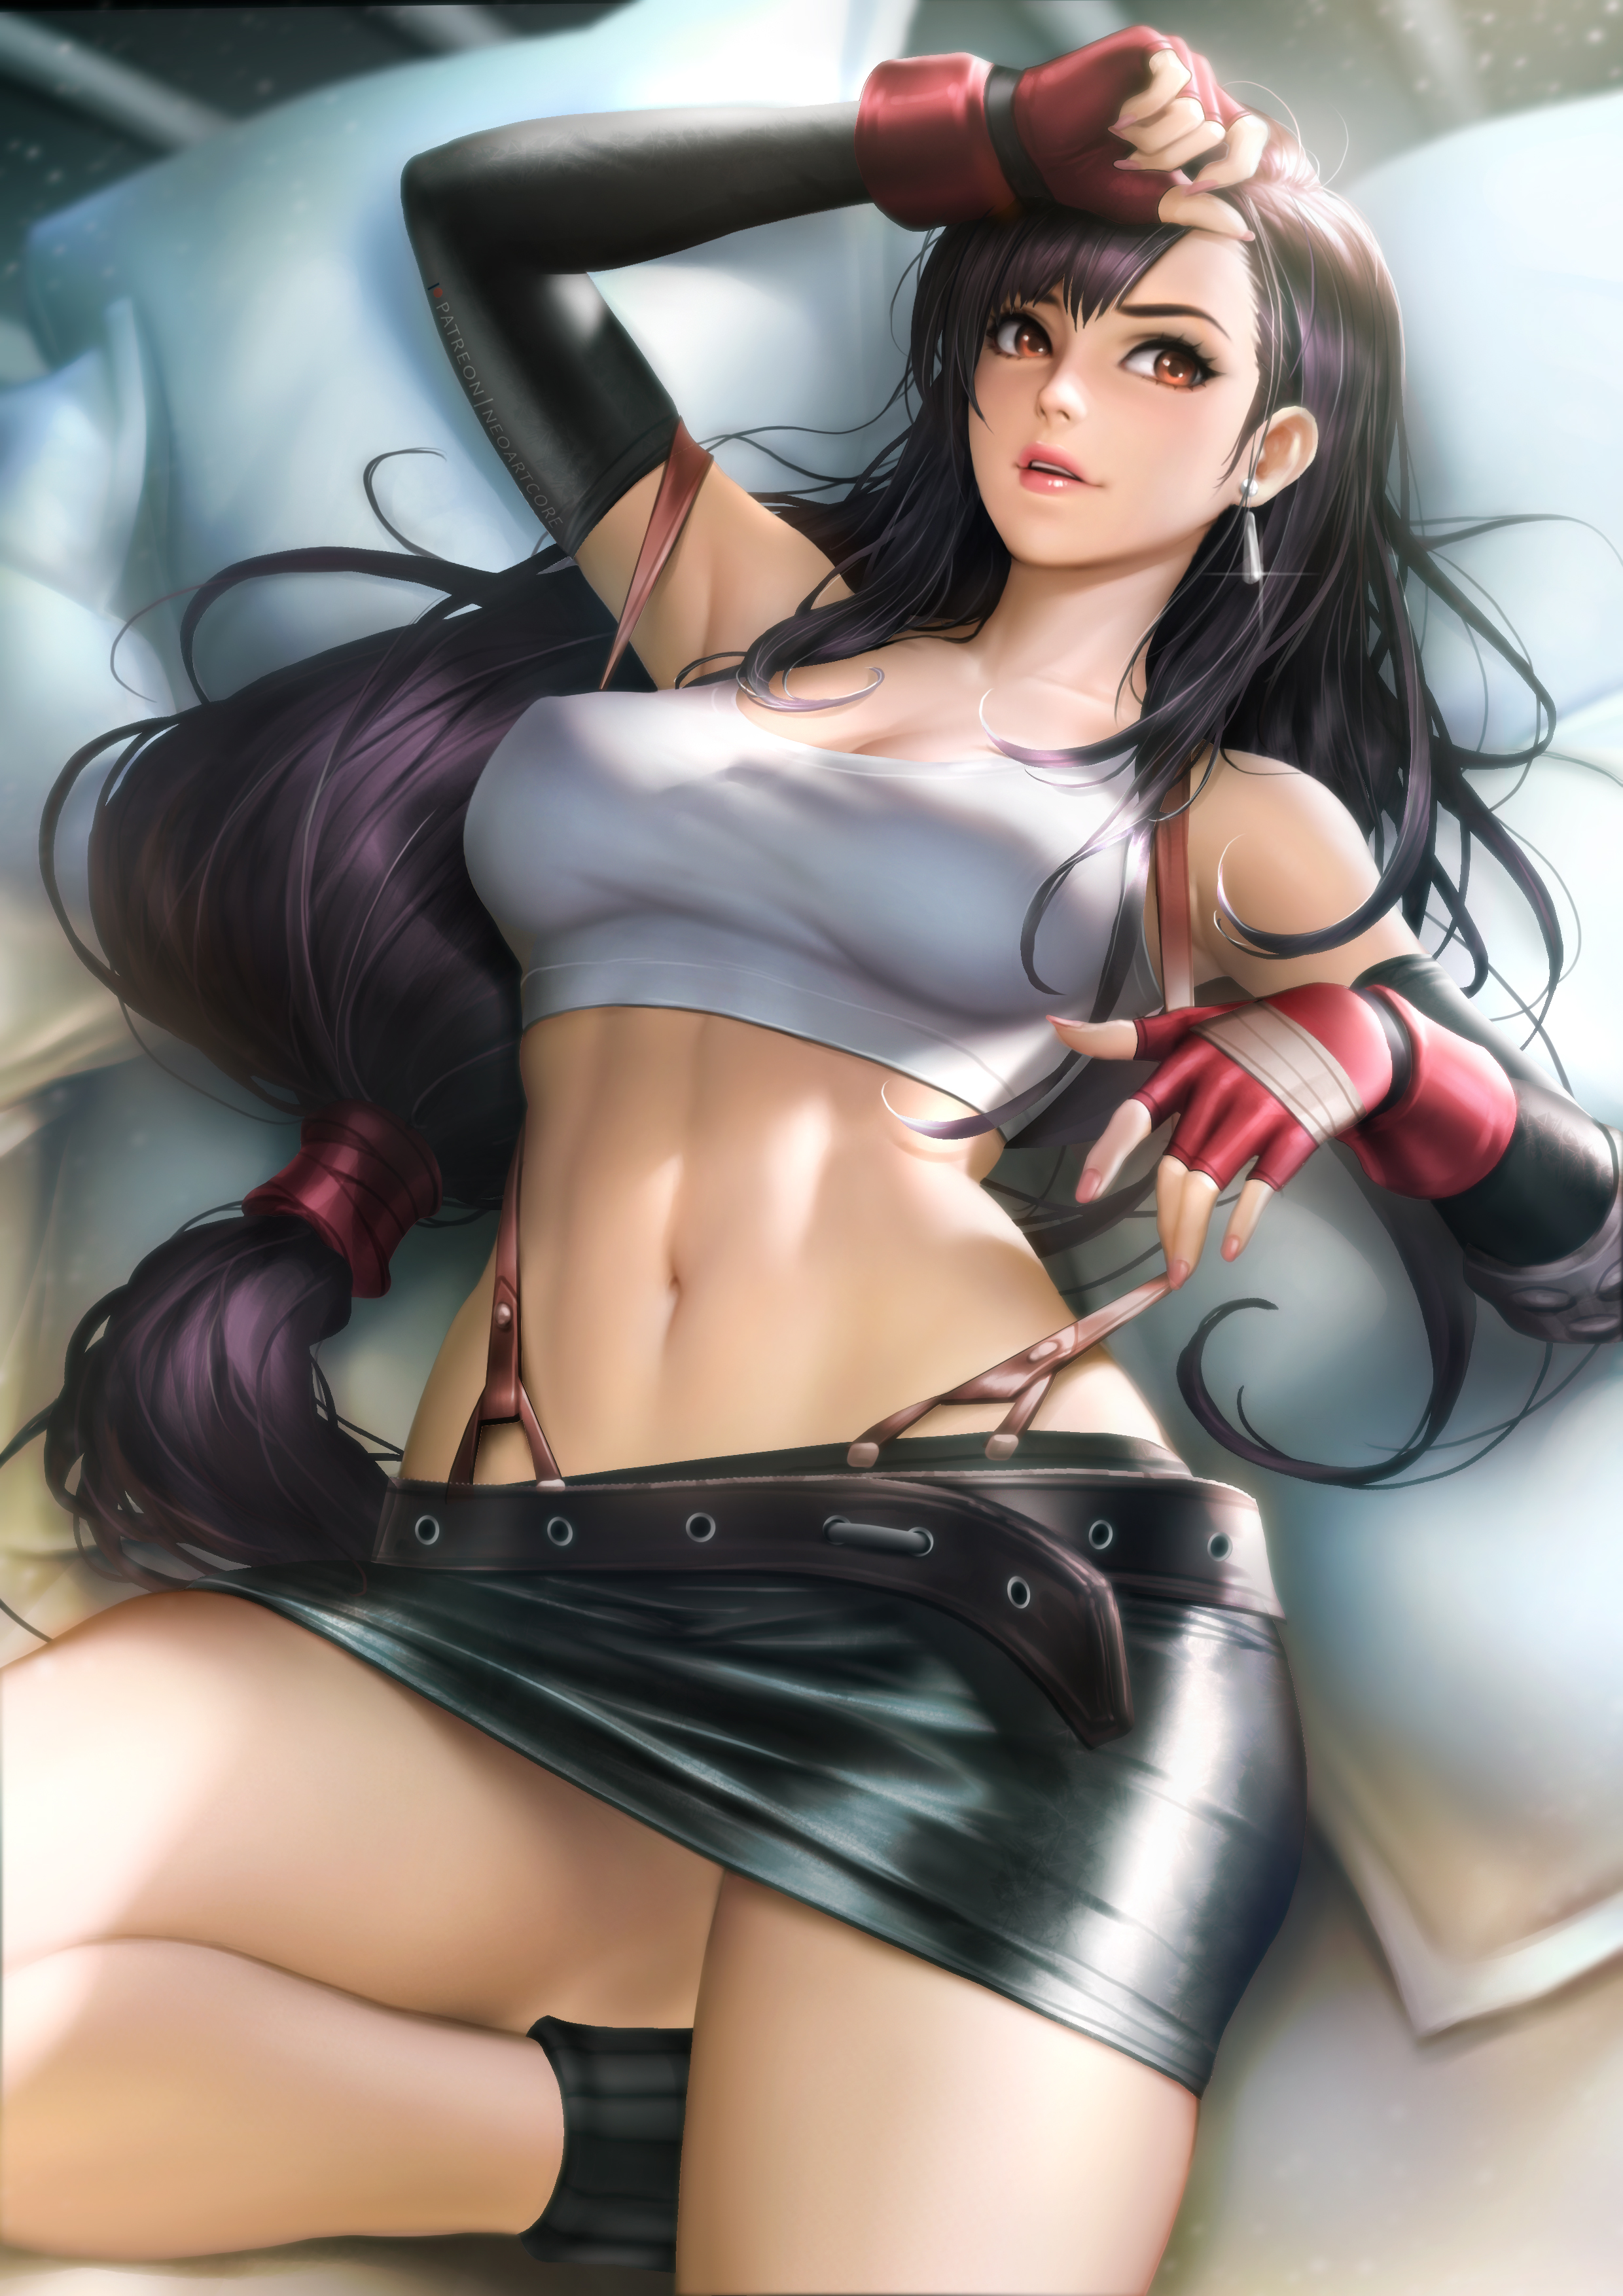 Anime 2480x3508 Tifa Lockhart Final Fantasy Final Fantasy VII video games video game characters anime girls brunette long hair red eyes looking away white tops belly miniskirt suspenders curvy lying on back pillow in bed top view fingerless gloves video game girls anime artwork drawing digital art illustration fan art NeoArtCorE (artist) portrait display boobs big boobs